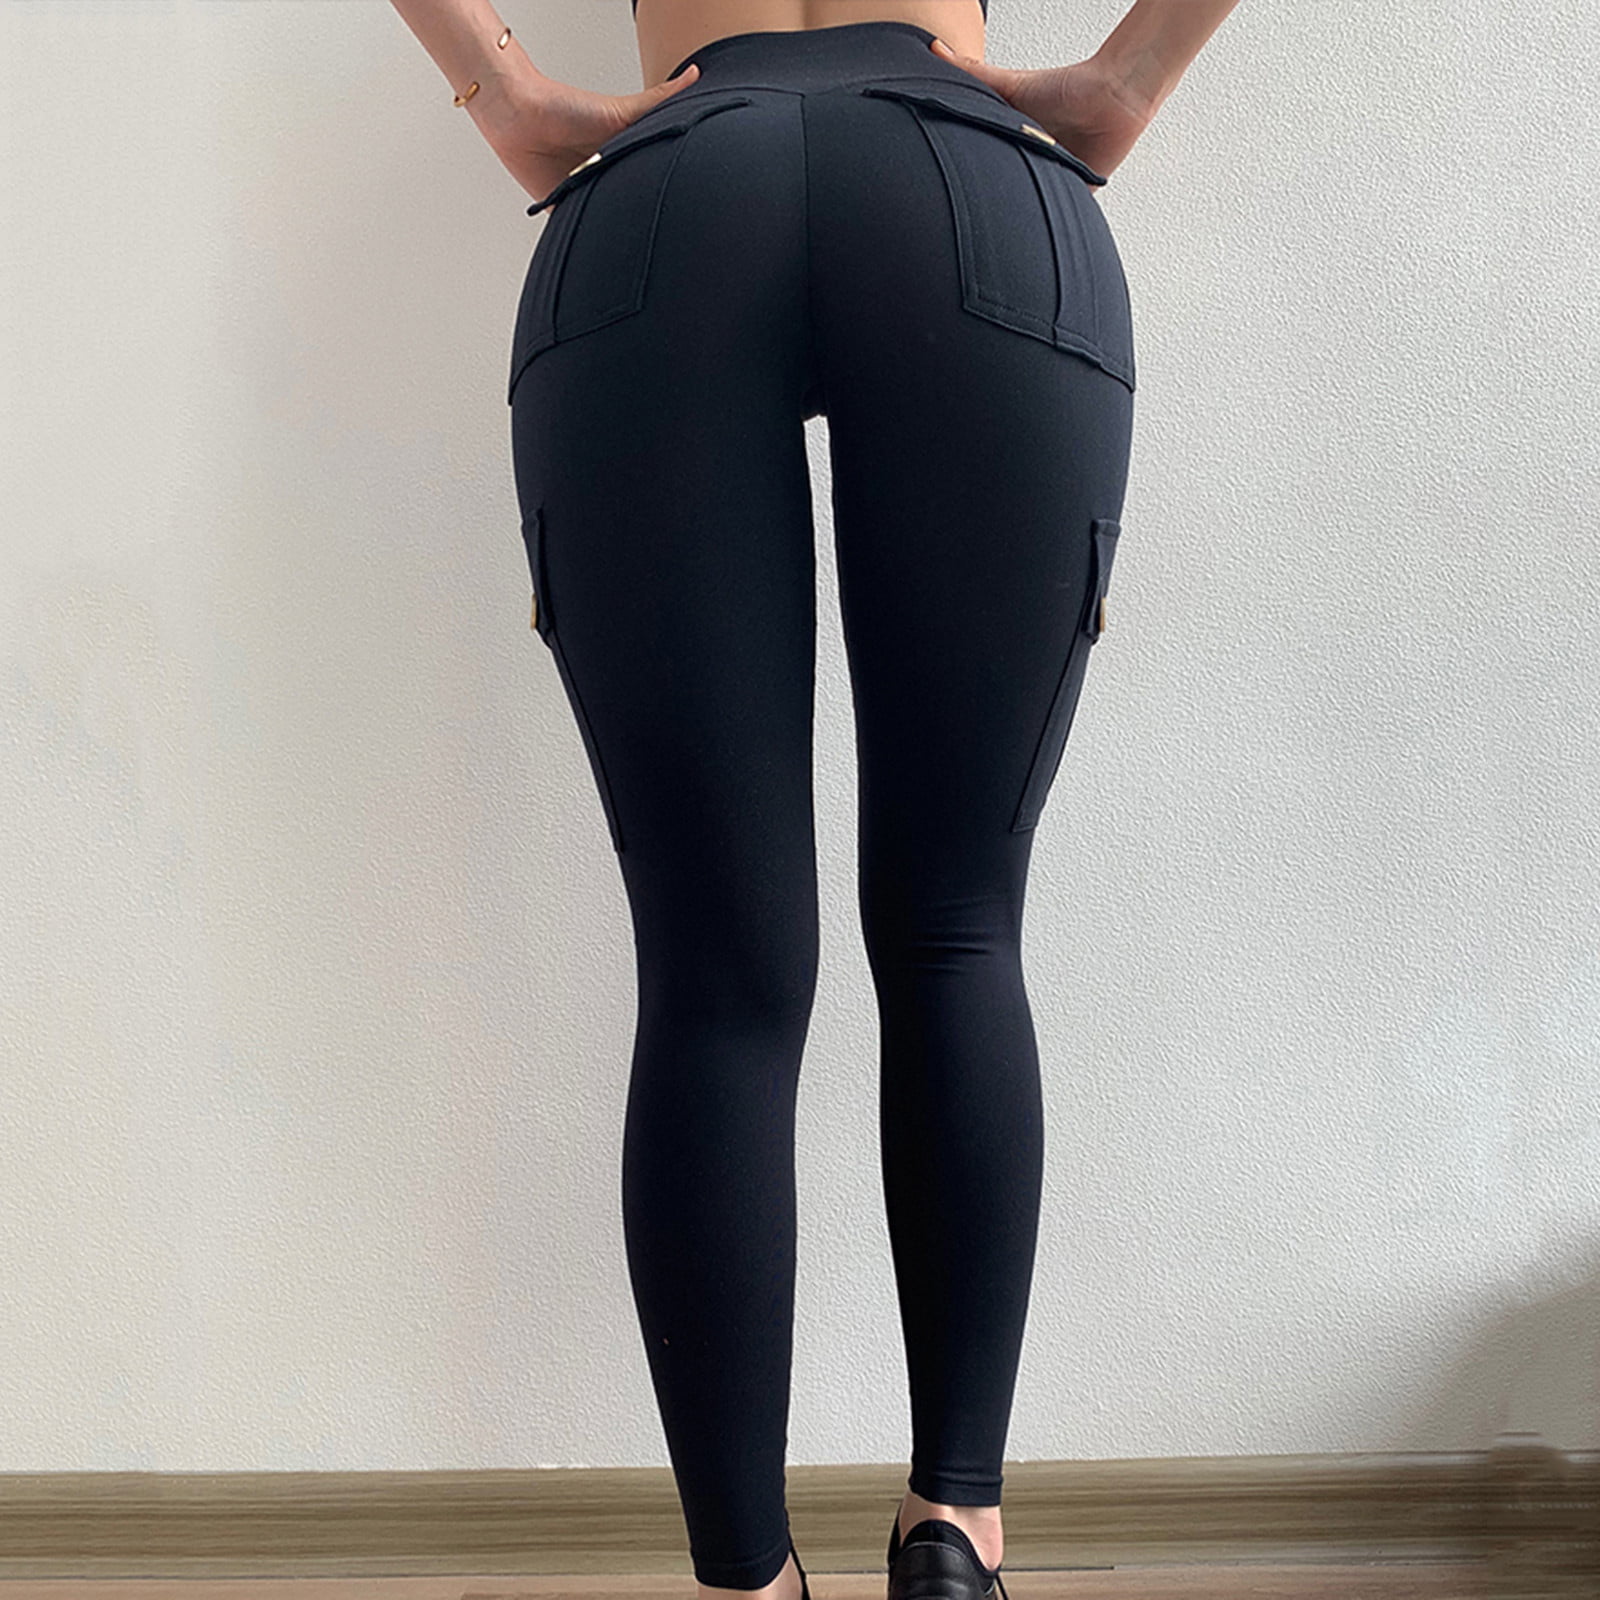 Kayannuo Yoga Pants Women Back to School Clearance Women's Bubble Hip  Lifting Exercise Fitness Running High Waist Yoga Pants White 